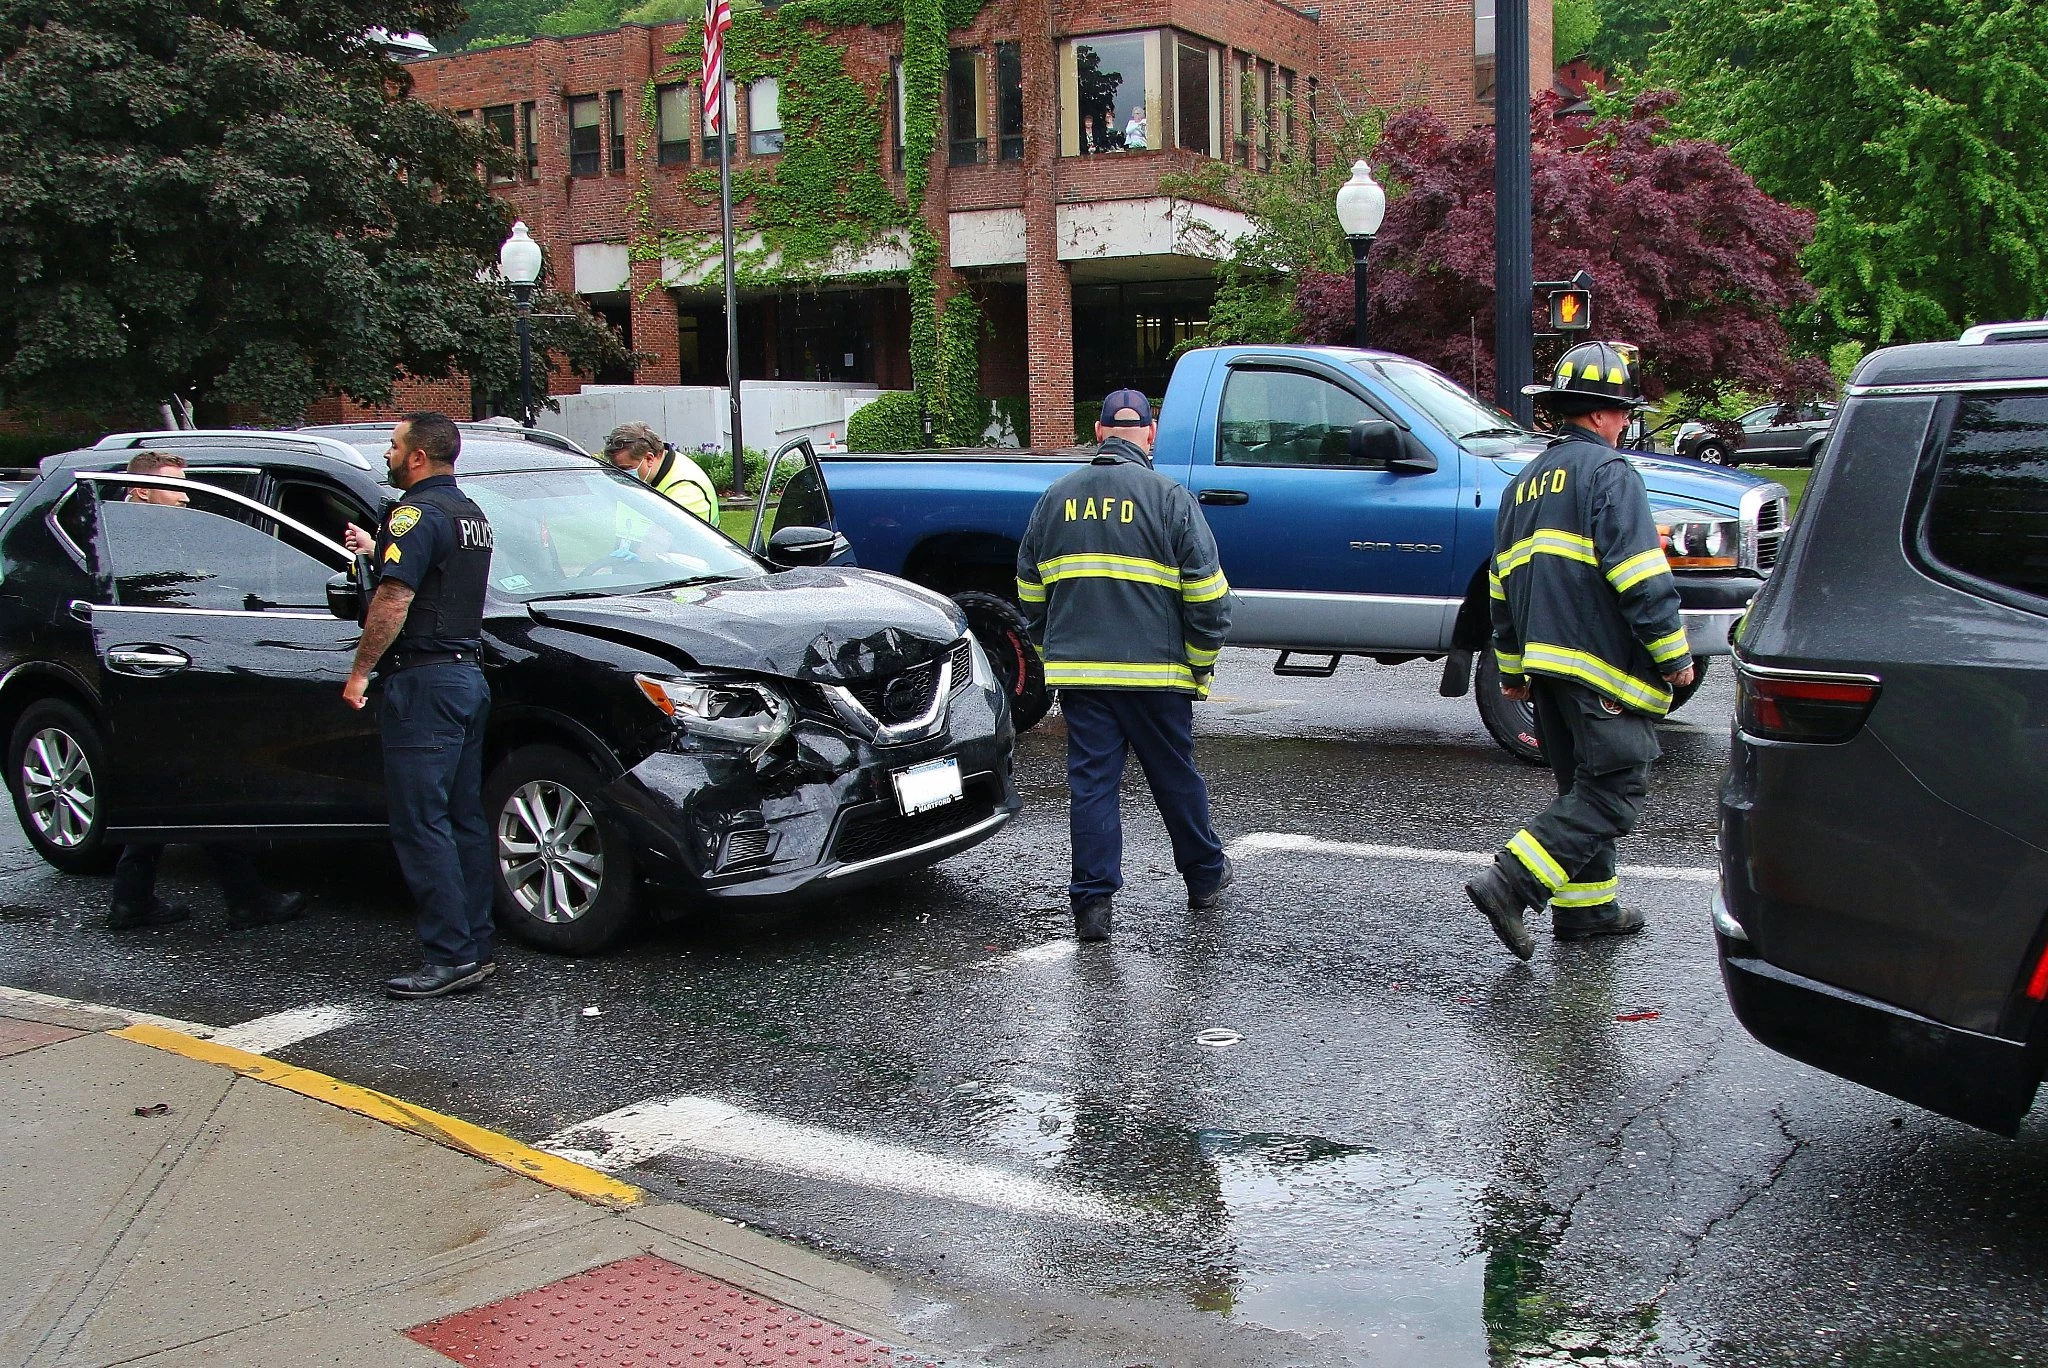 Two Vehicles Collide At A Busy North Adams Intersection pic pic